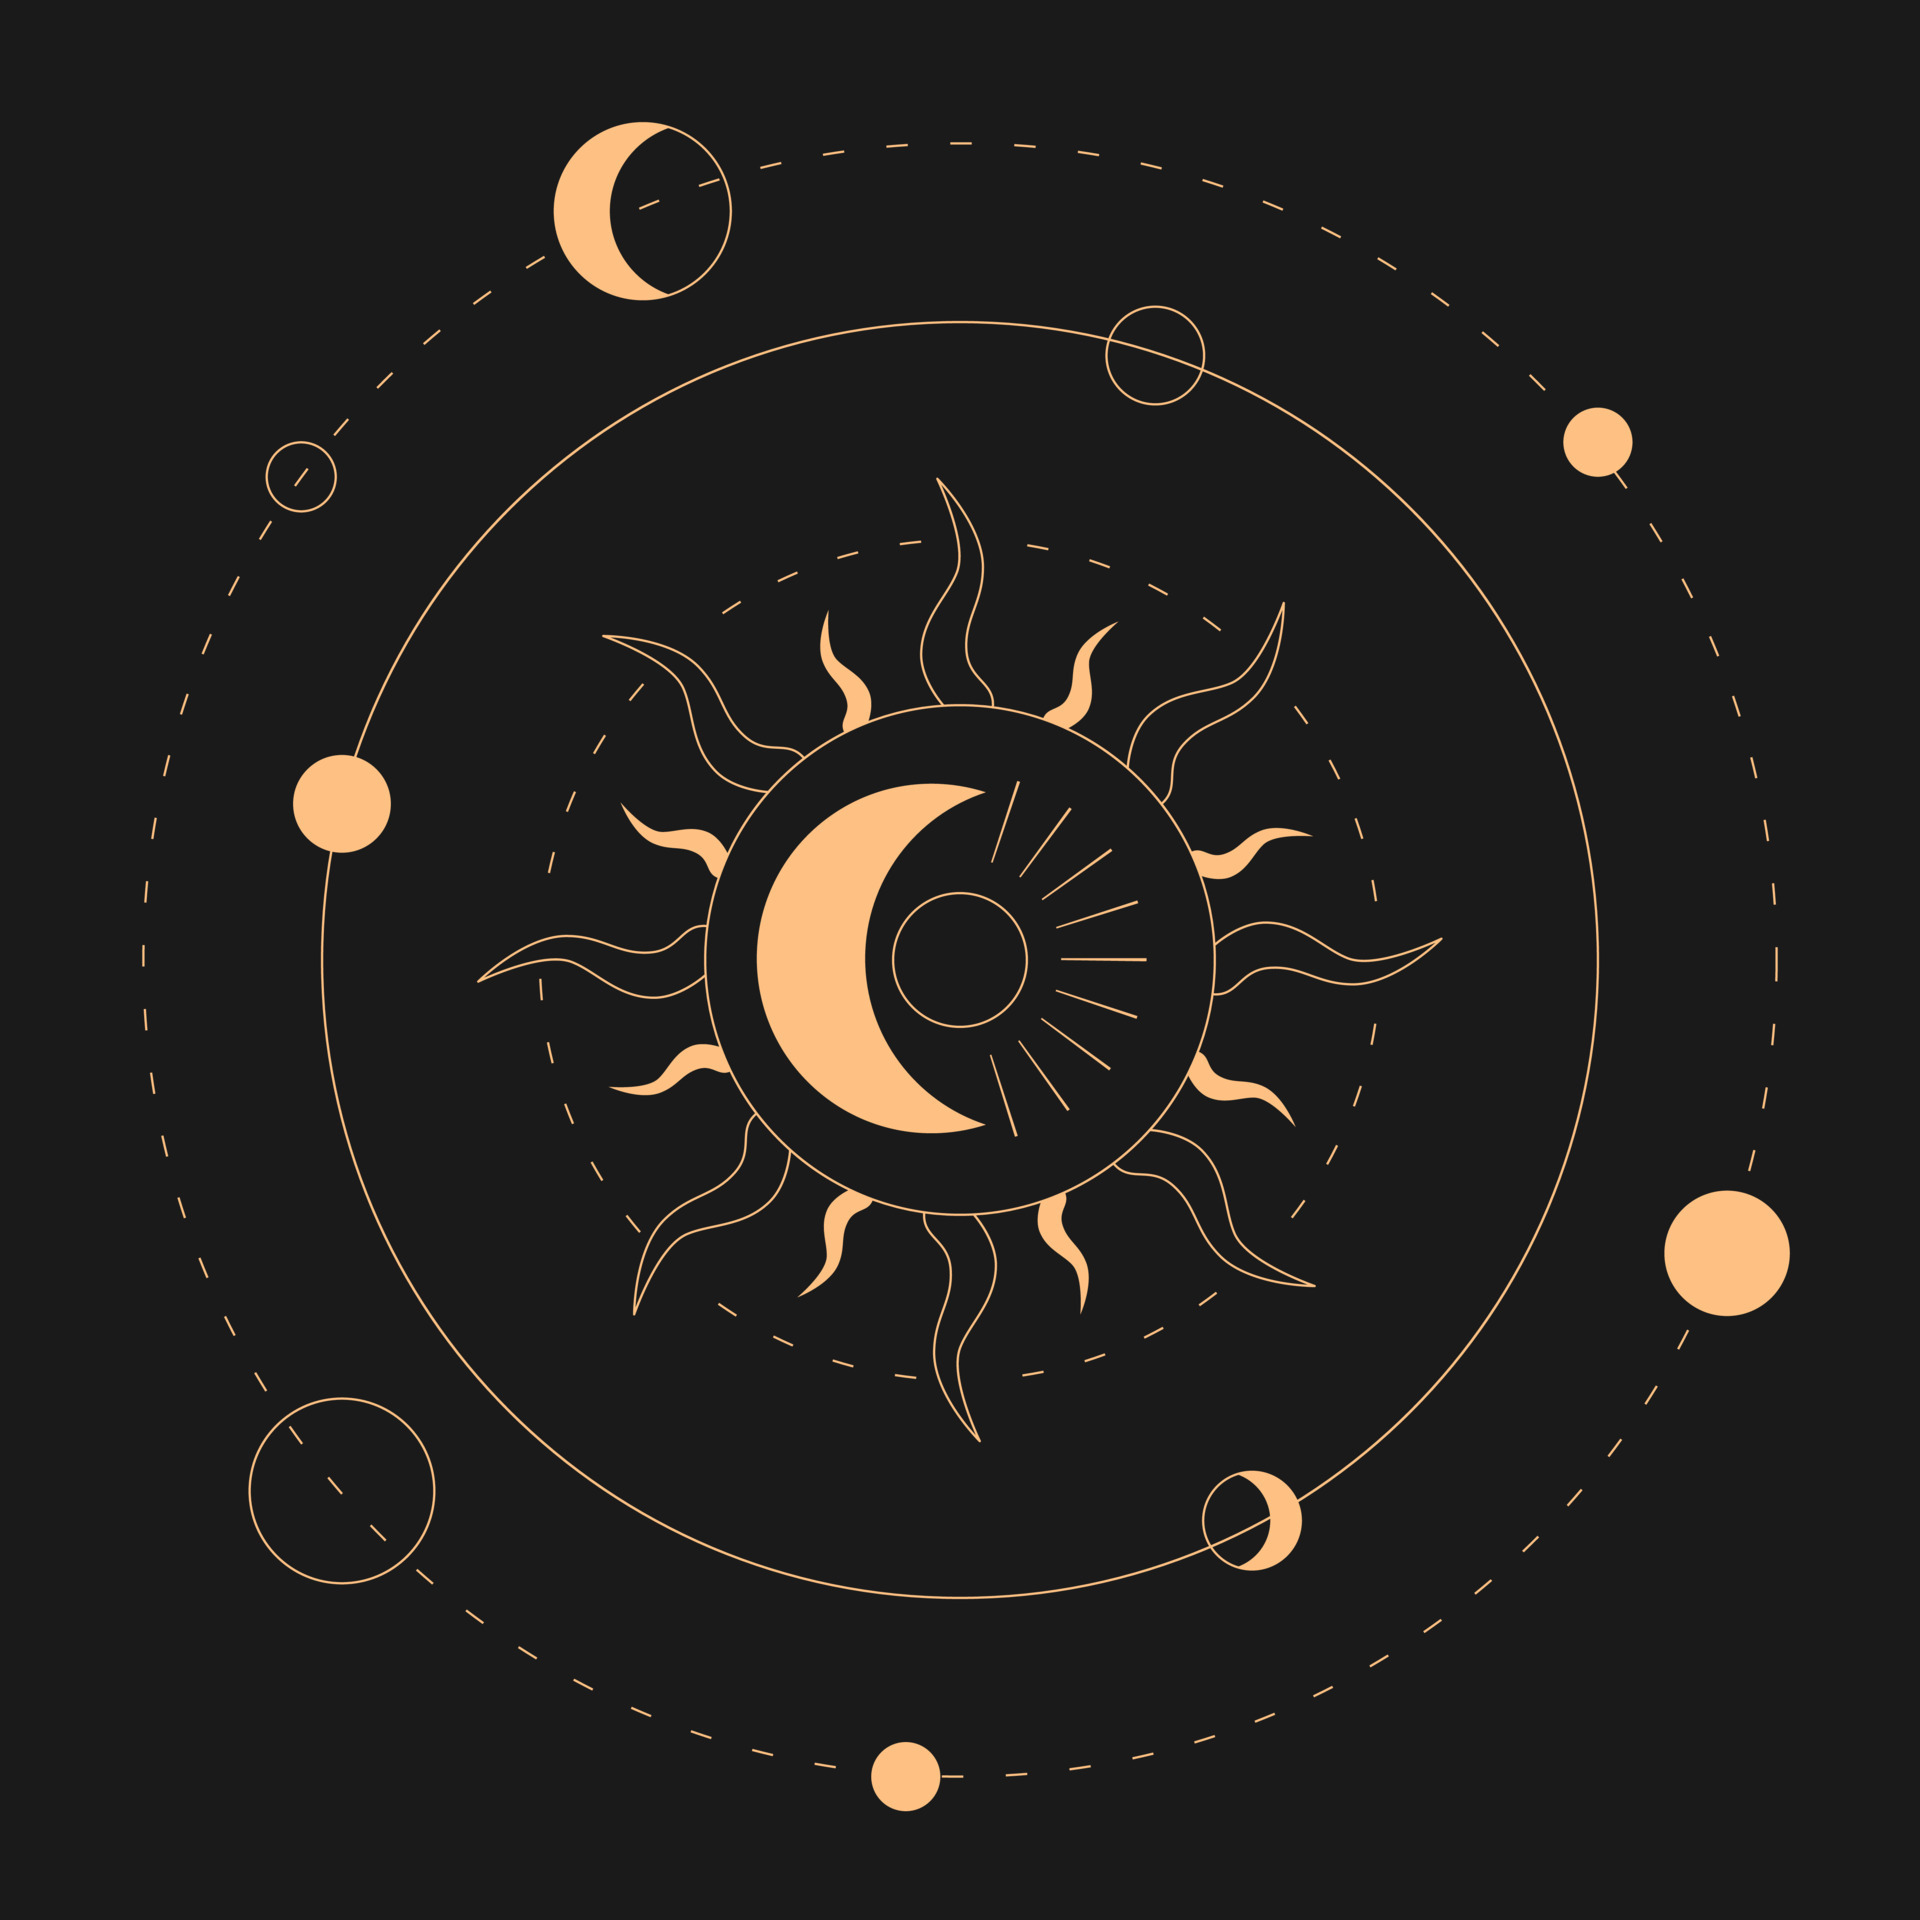 IV. Foire aux Questions Celestial-sun-and-moon-magical-banner-for-astrology-celestial-alchemy-device-of-the-universe-crescent-sun-with-the-moon-and-planets-on-a-black-background-esoteric-illustration-vector